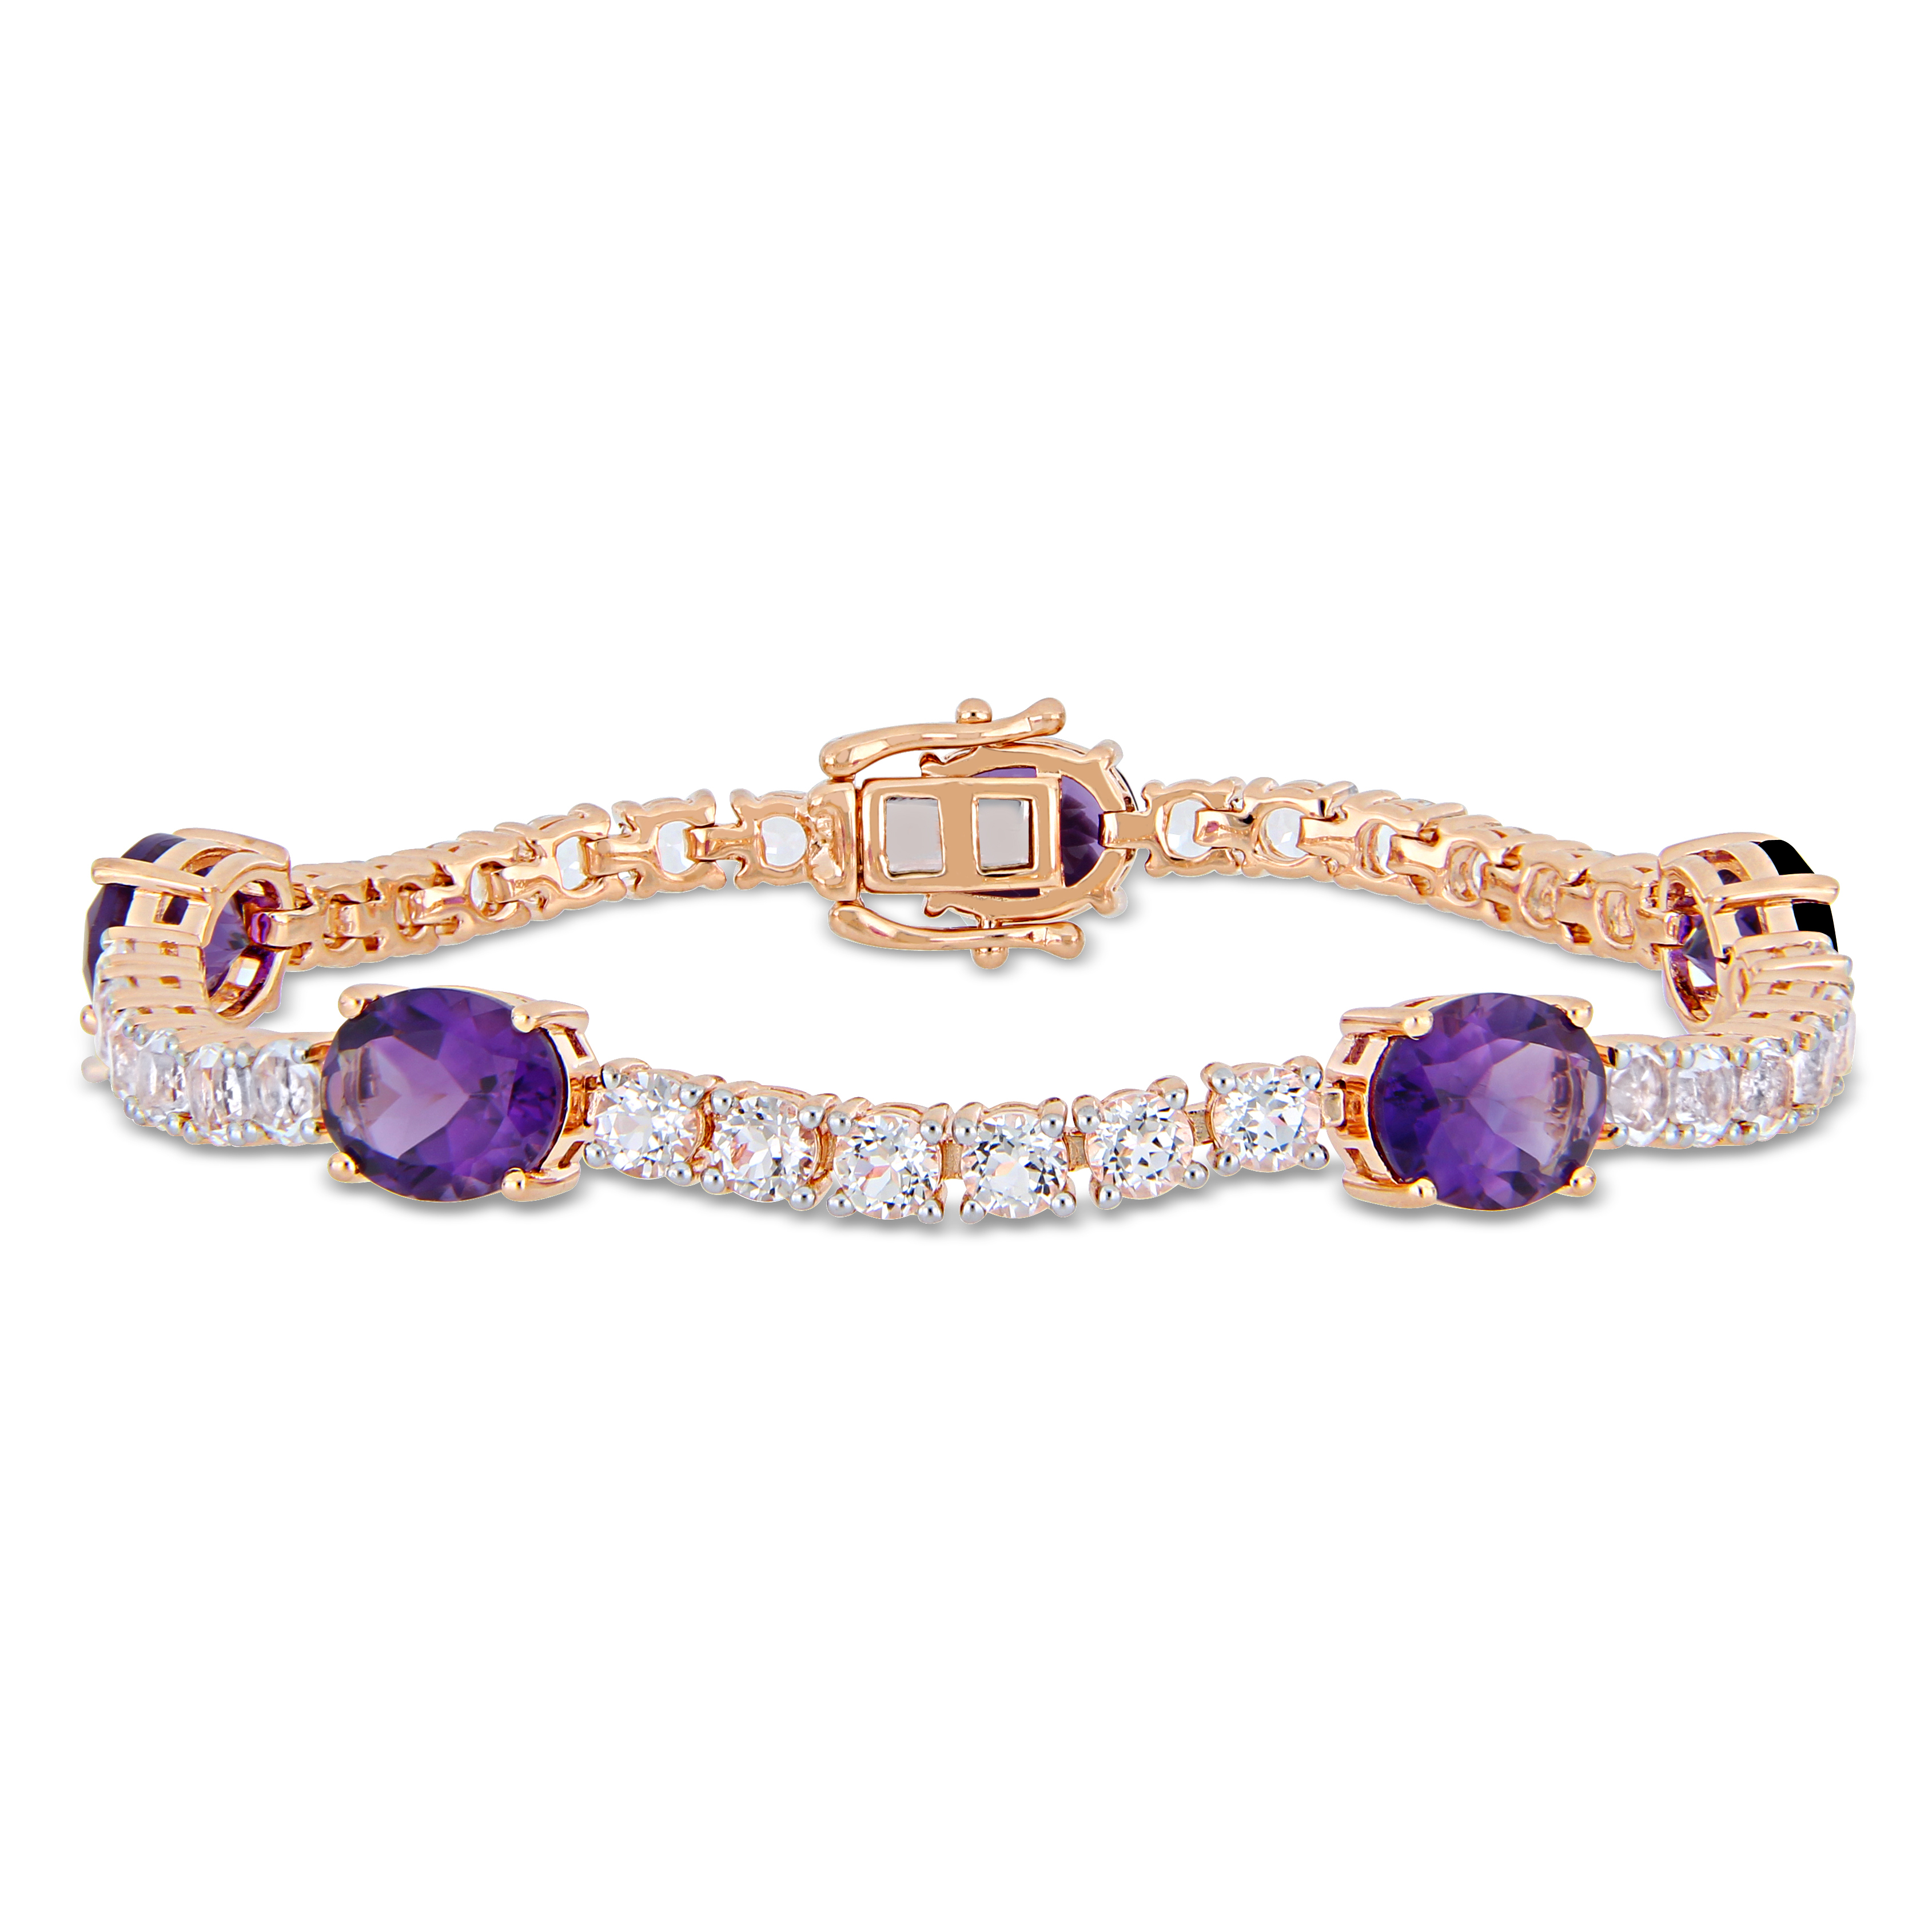 21 CT TGW Africa-Amethyst and White Topaz Station Link Bracelet in Rose Gold Plated Sterling Silver - 7.25 in.